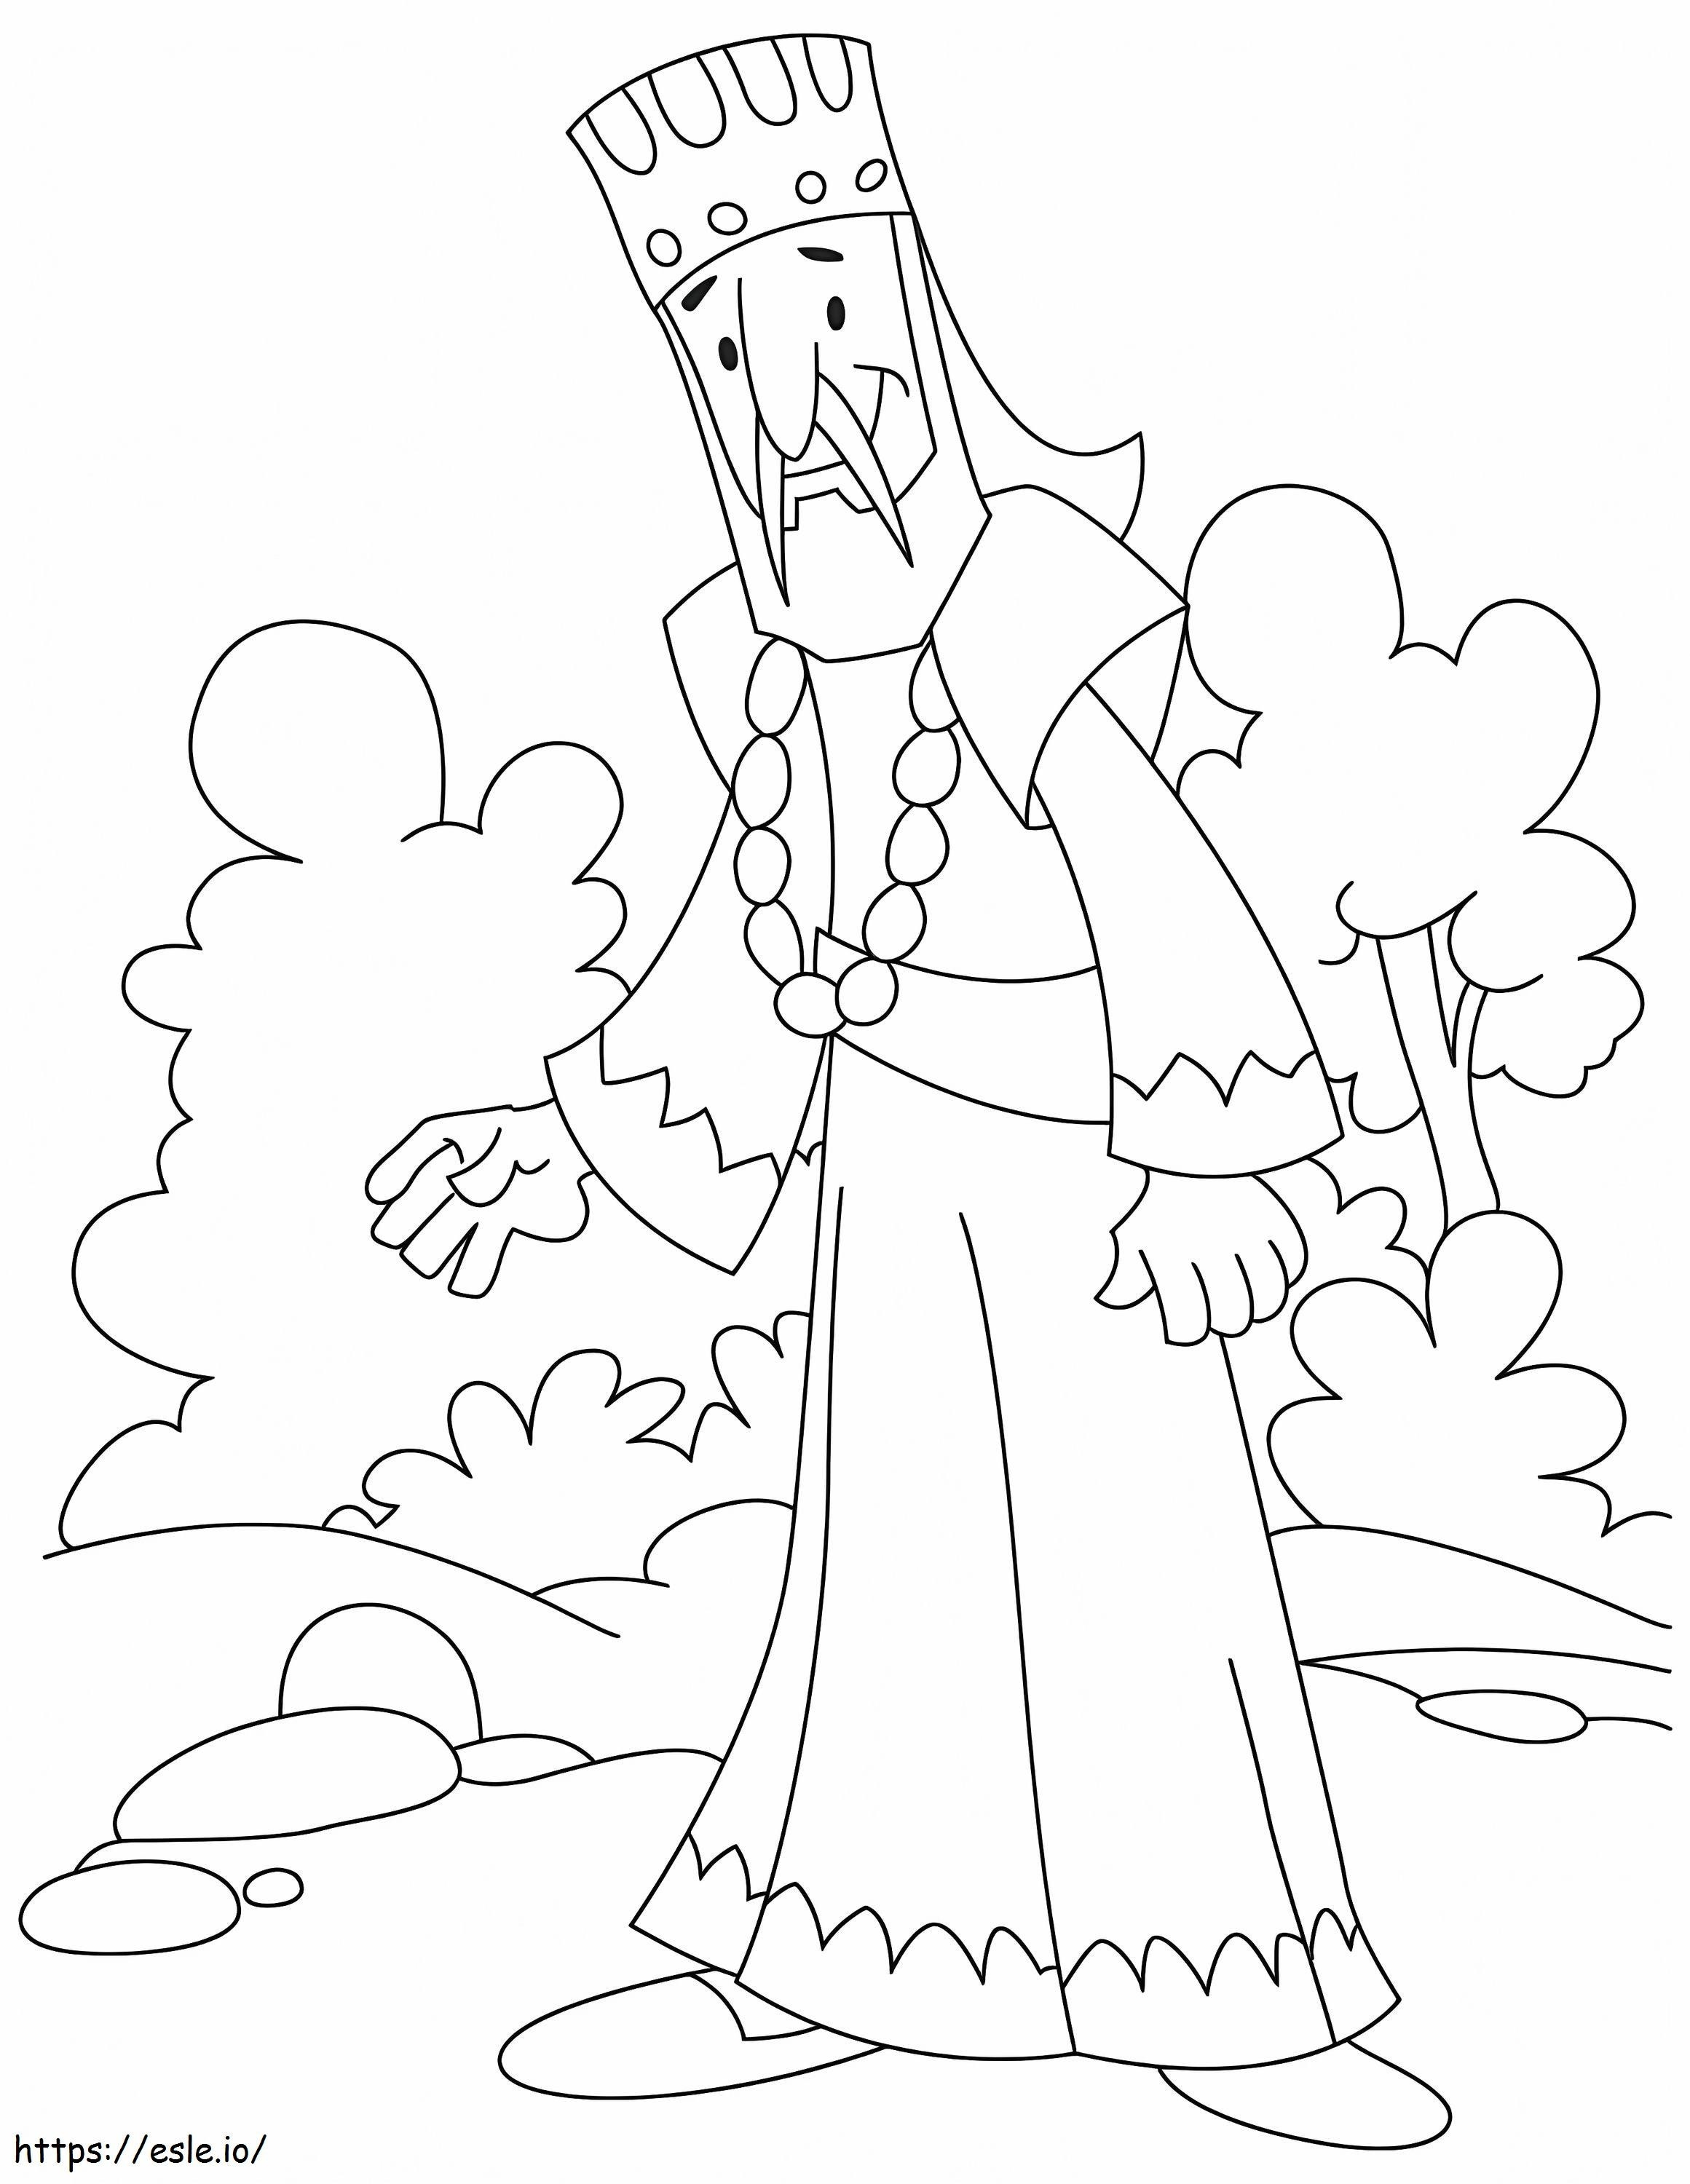 King Is Smiling coloring page